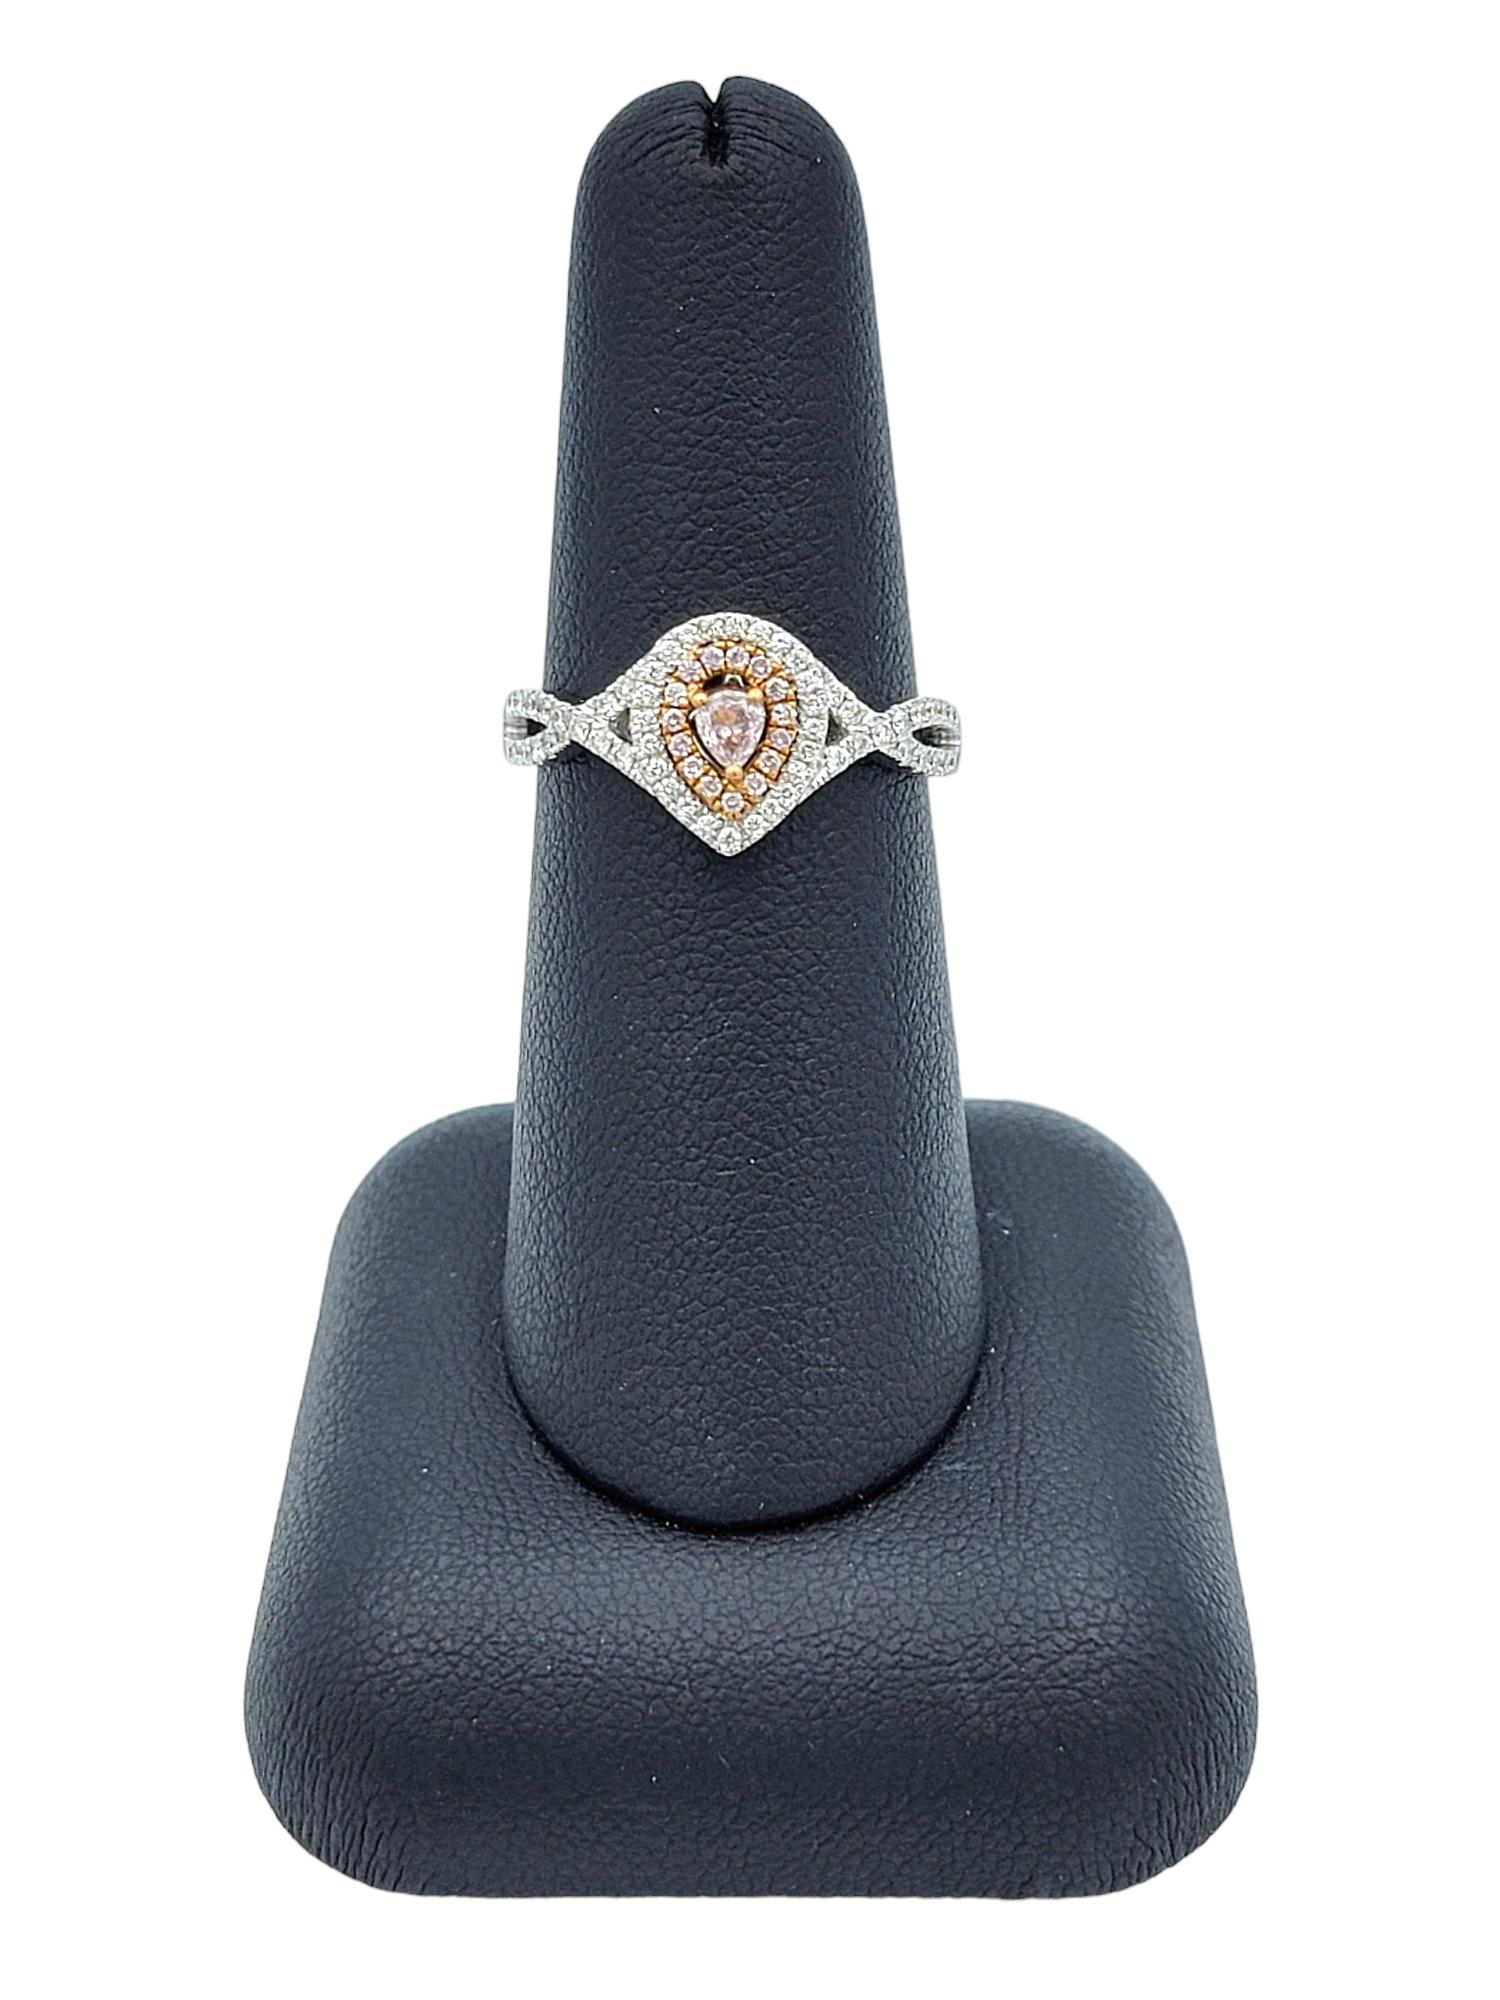 Pink and White Pear-Shaped Diamond Double Halo Ring Set in 18 Karat White Gold For Sale 3